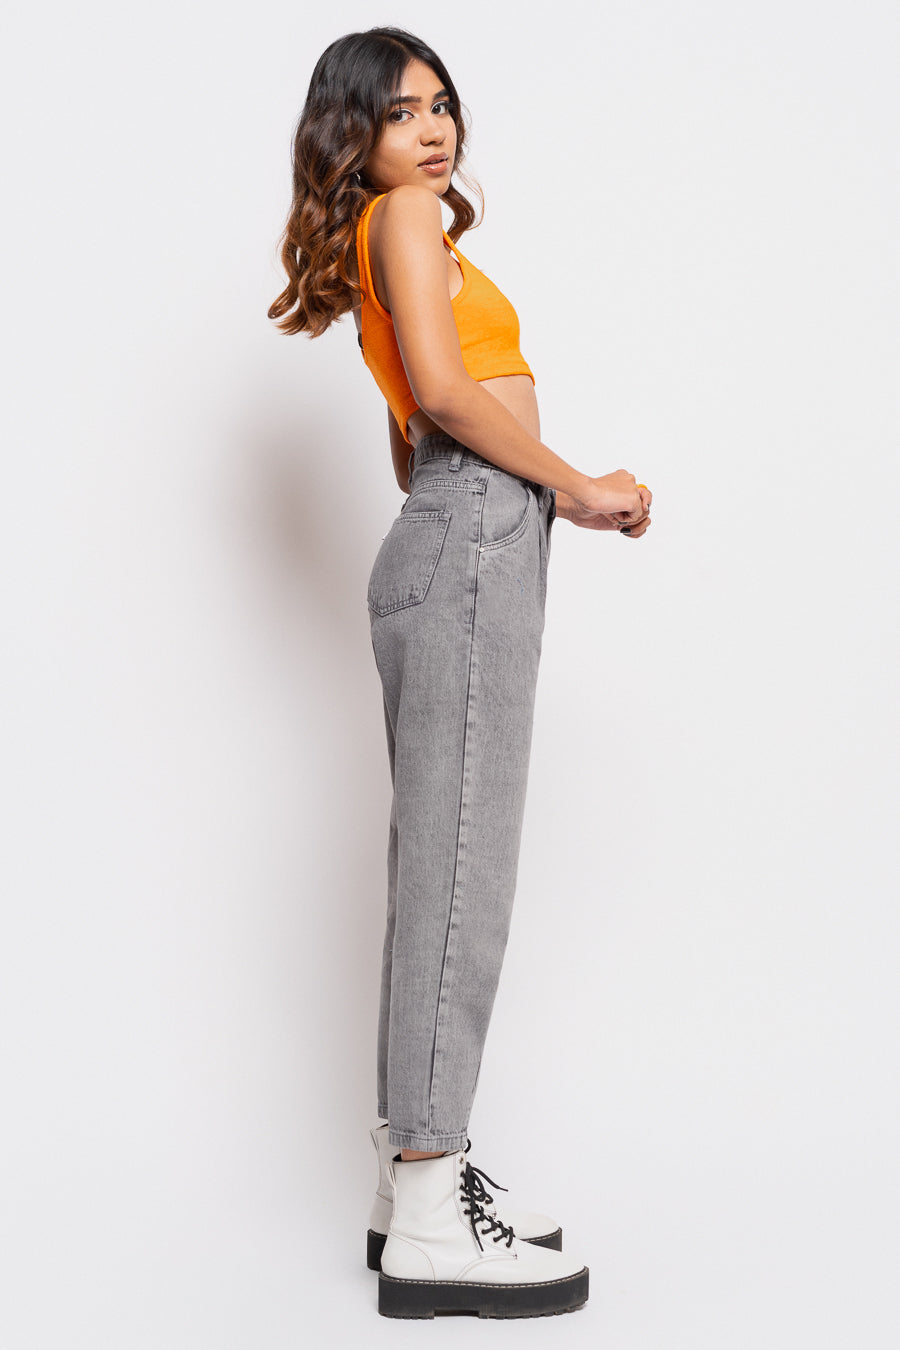 VINTAGE GREY SLOUCHY JEANS